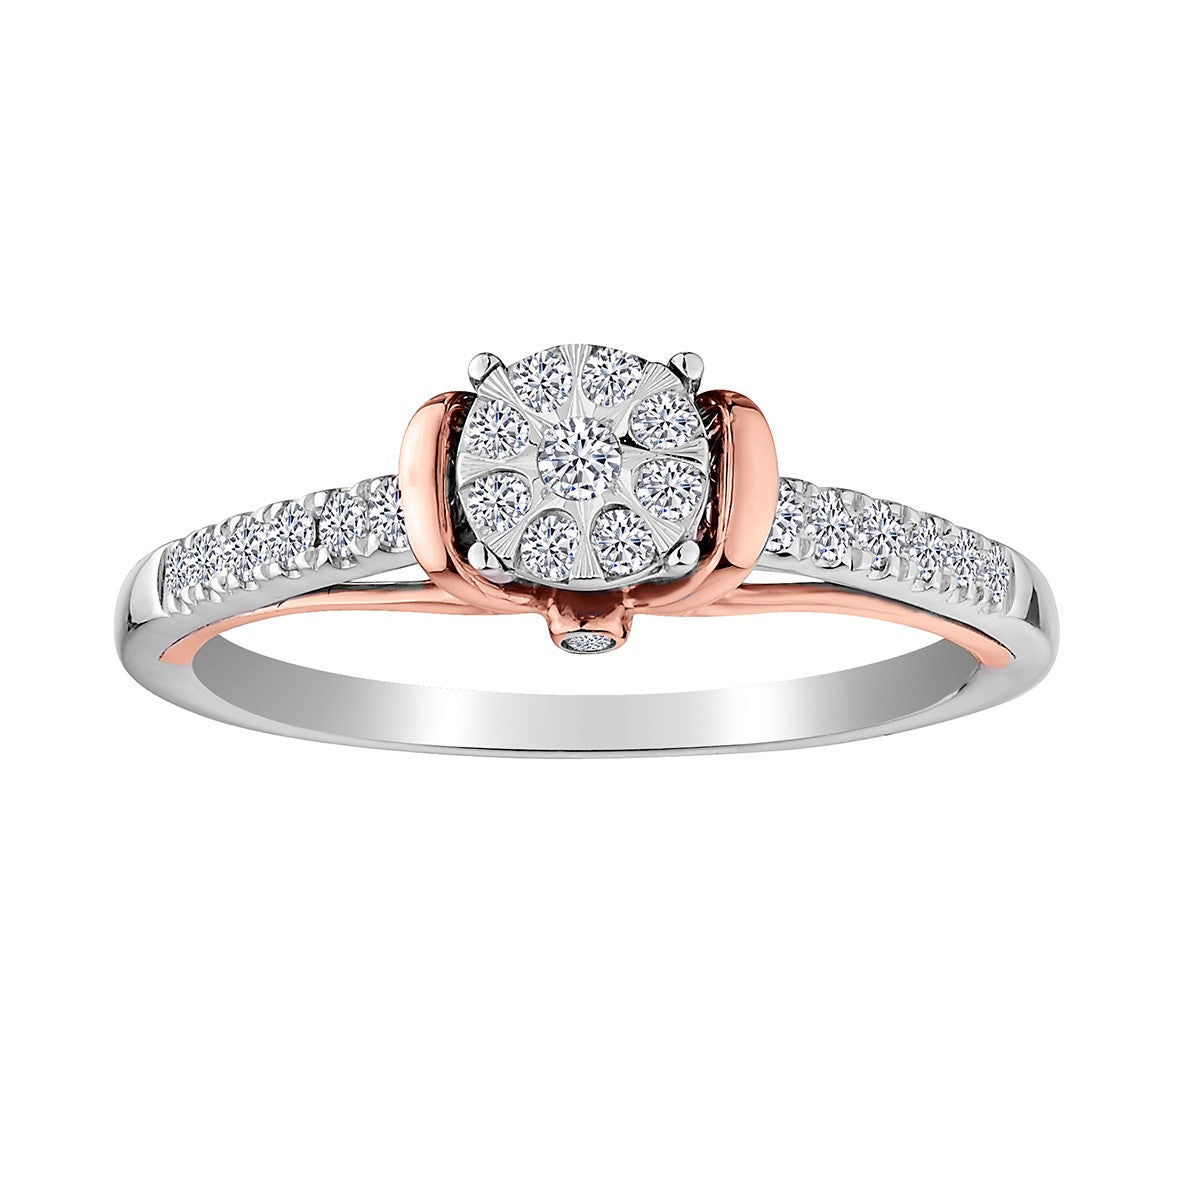 .25 CARAT "BLUSH" DIAMOND RING, 10kt WHITE AND ROSE GOLD (TWO TONE)......................NOW